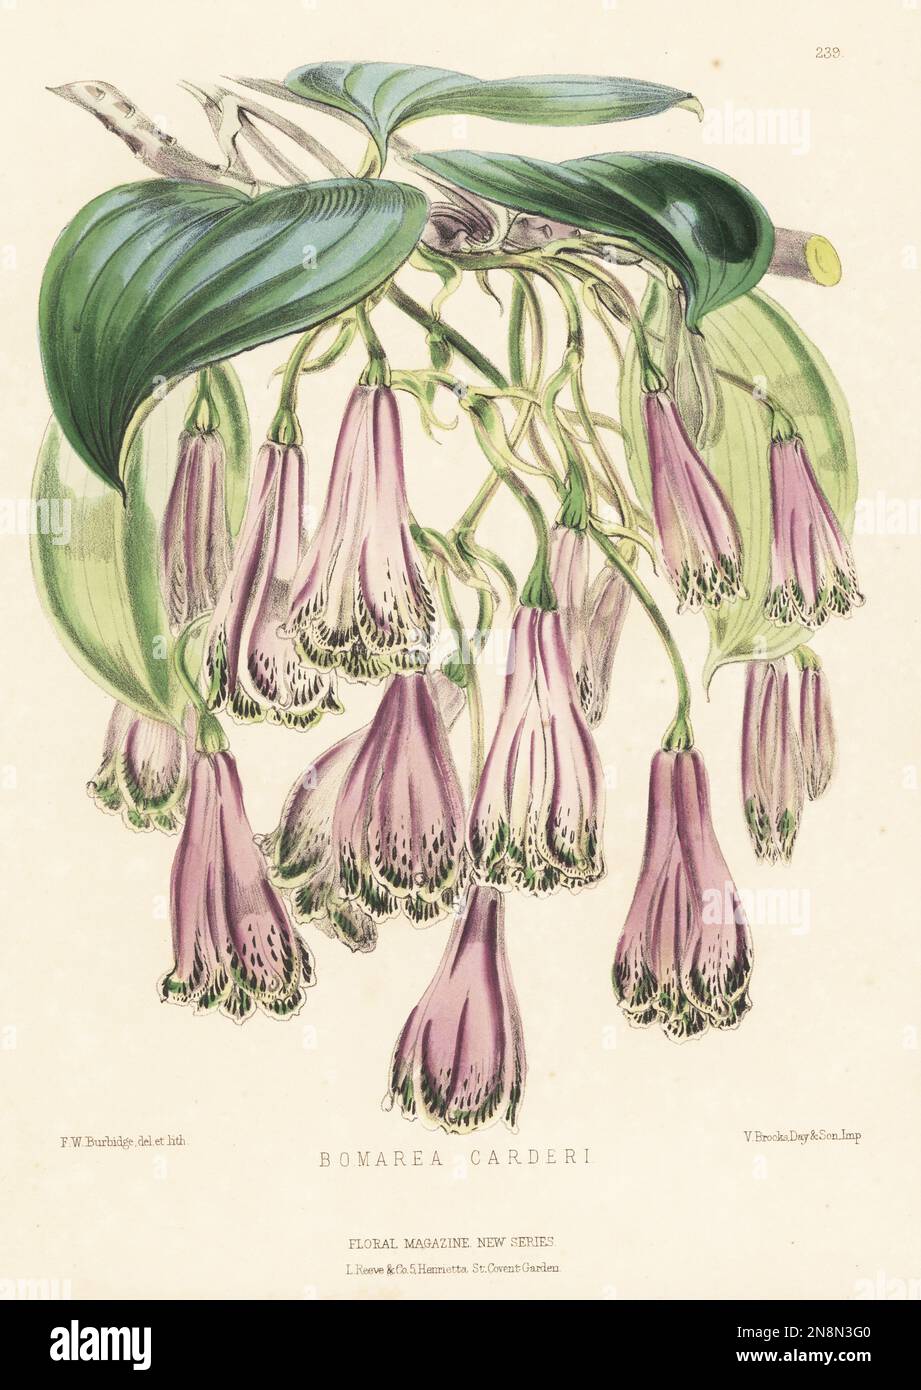 Bomarea carderi, native to Panama, Colombia and Ecuador. Imported from New Grenada by William Bull, King's Road, Chelsea. Handcolored botanical illustration drawn and lithographed by Frederick William Burbidge from Henry Honywood Dombrain's Floral Magazine, New Series, Volume 5, L. Reeve, London, 1876. Lithograph printed by Vincent Brooks, Day & Son. Stock Photo